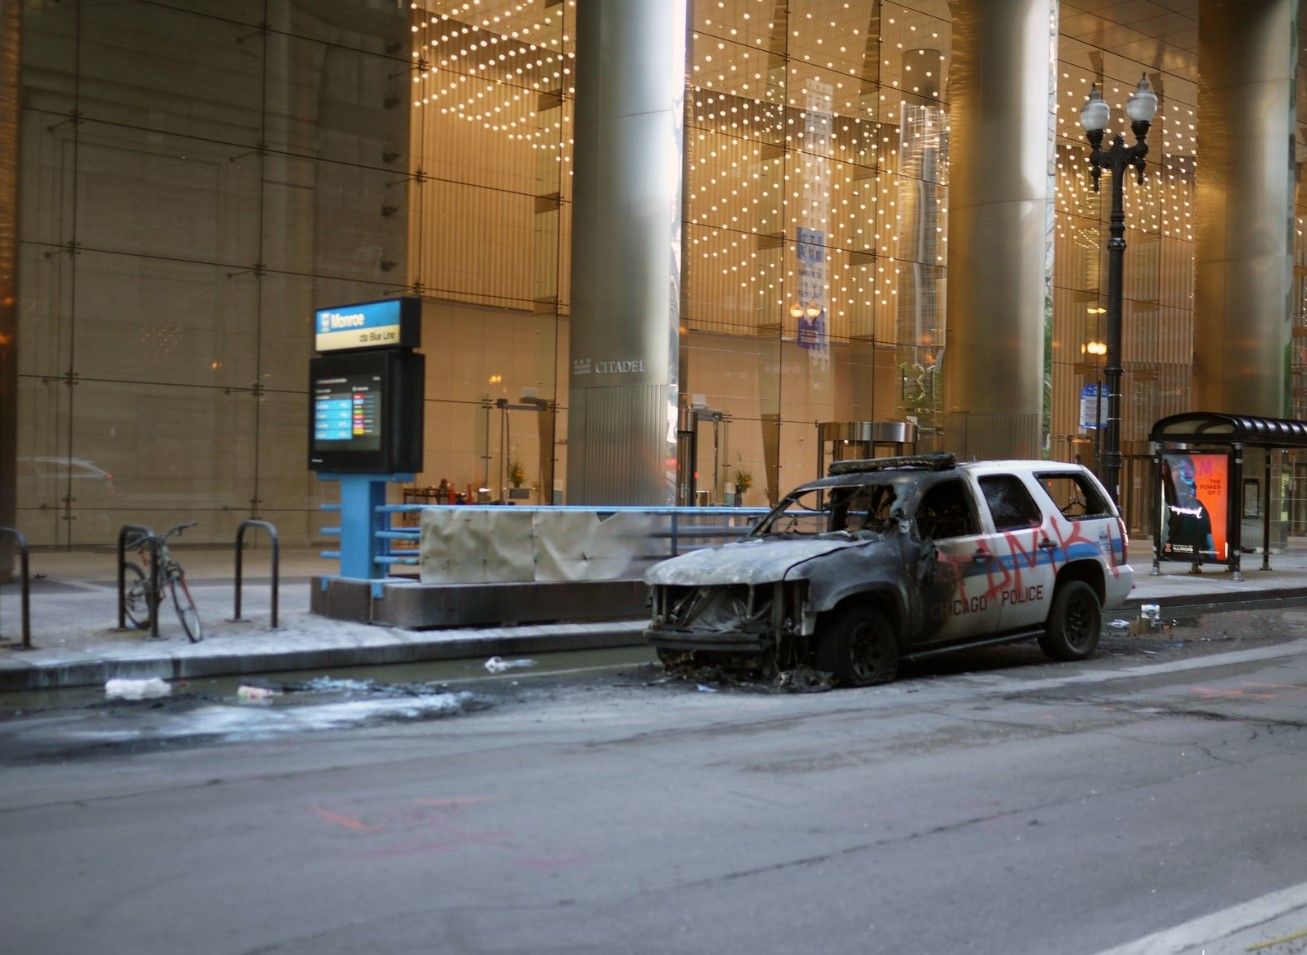 Man admits setting police SUV on fire in riot